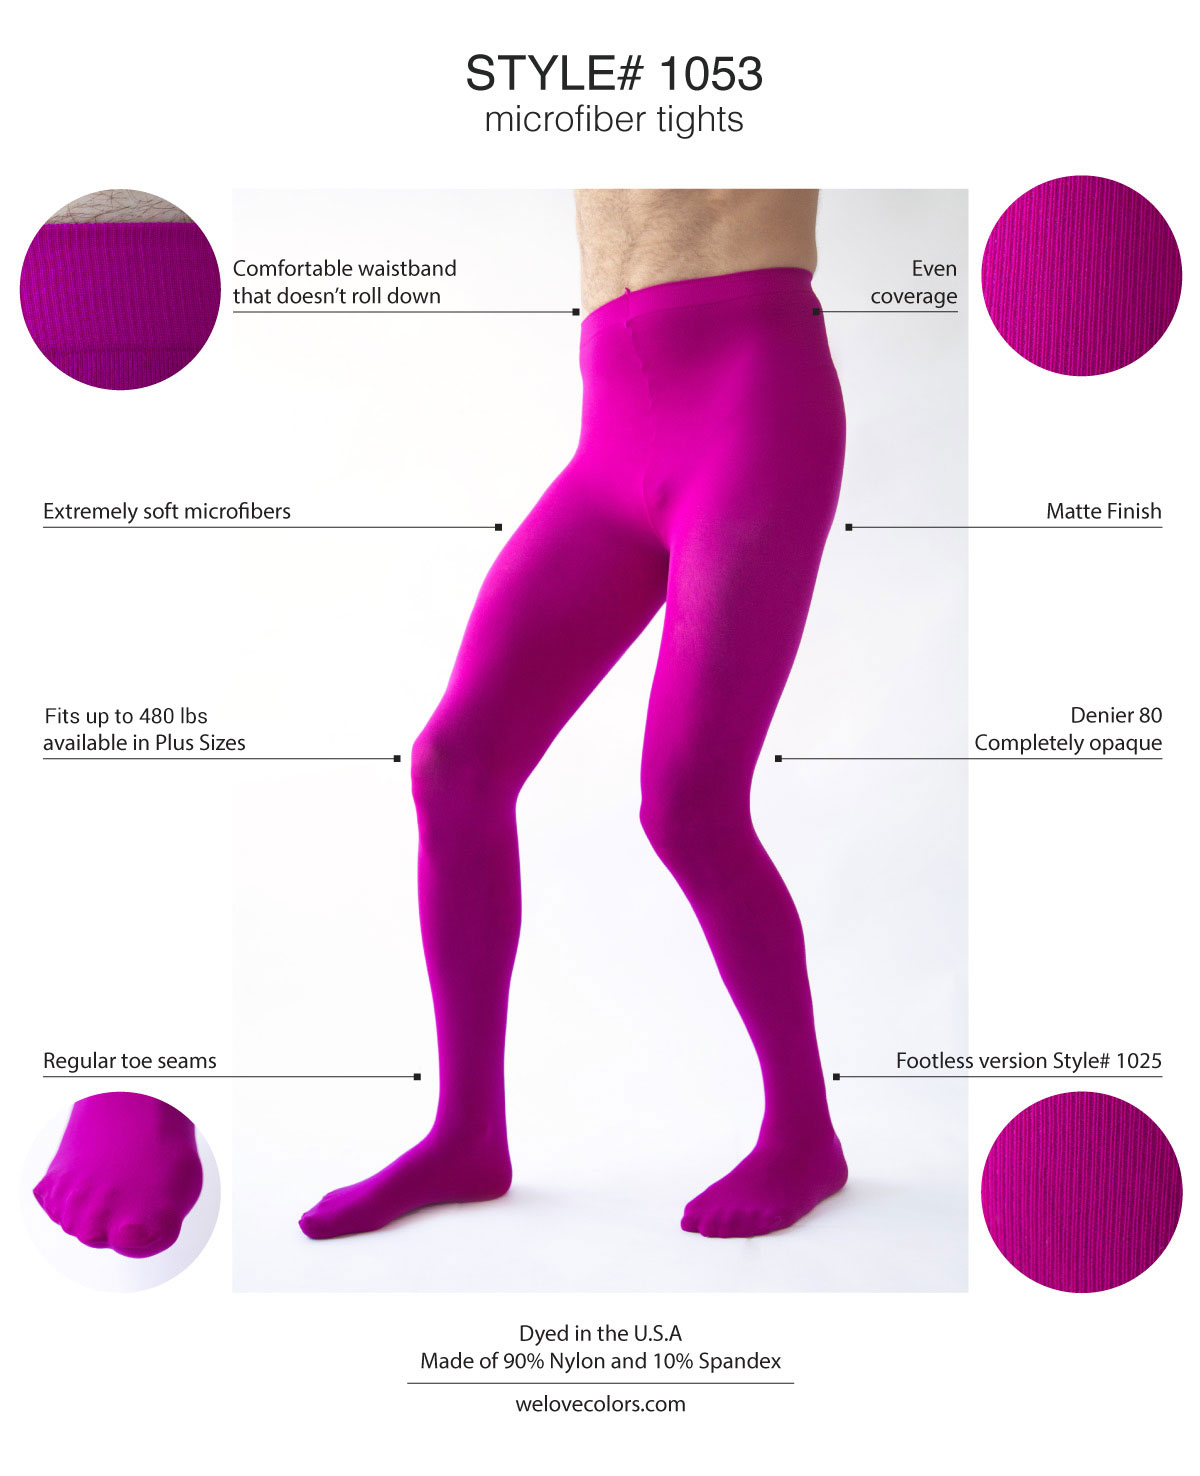 Comfortable Colored Tights For Men Do Exist - We Love Colors